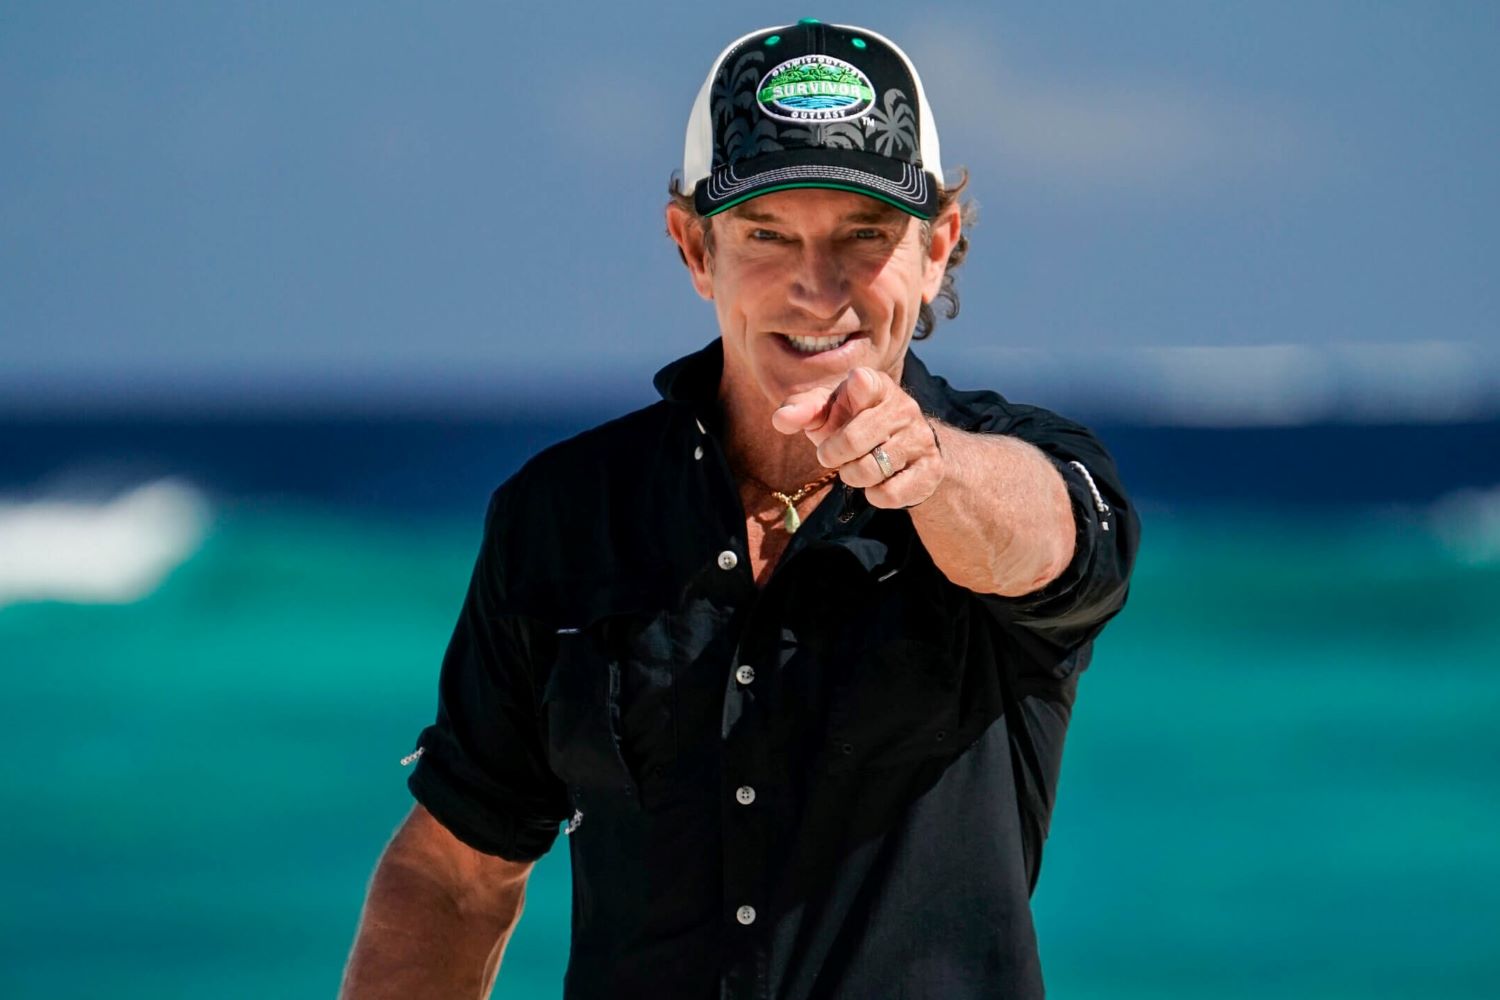 Jeff Probst, the host of 'Survivor 44' on CBS, wears a black button-up shirt with rolled-up sleeves and a black, white, and green 'Survivor' baseball cap while pointing at the camera.